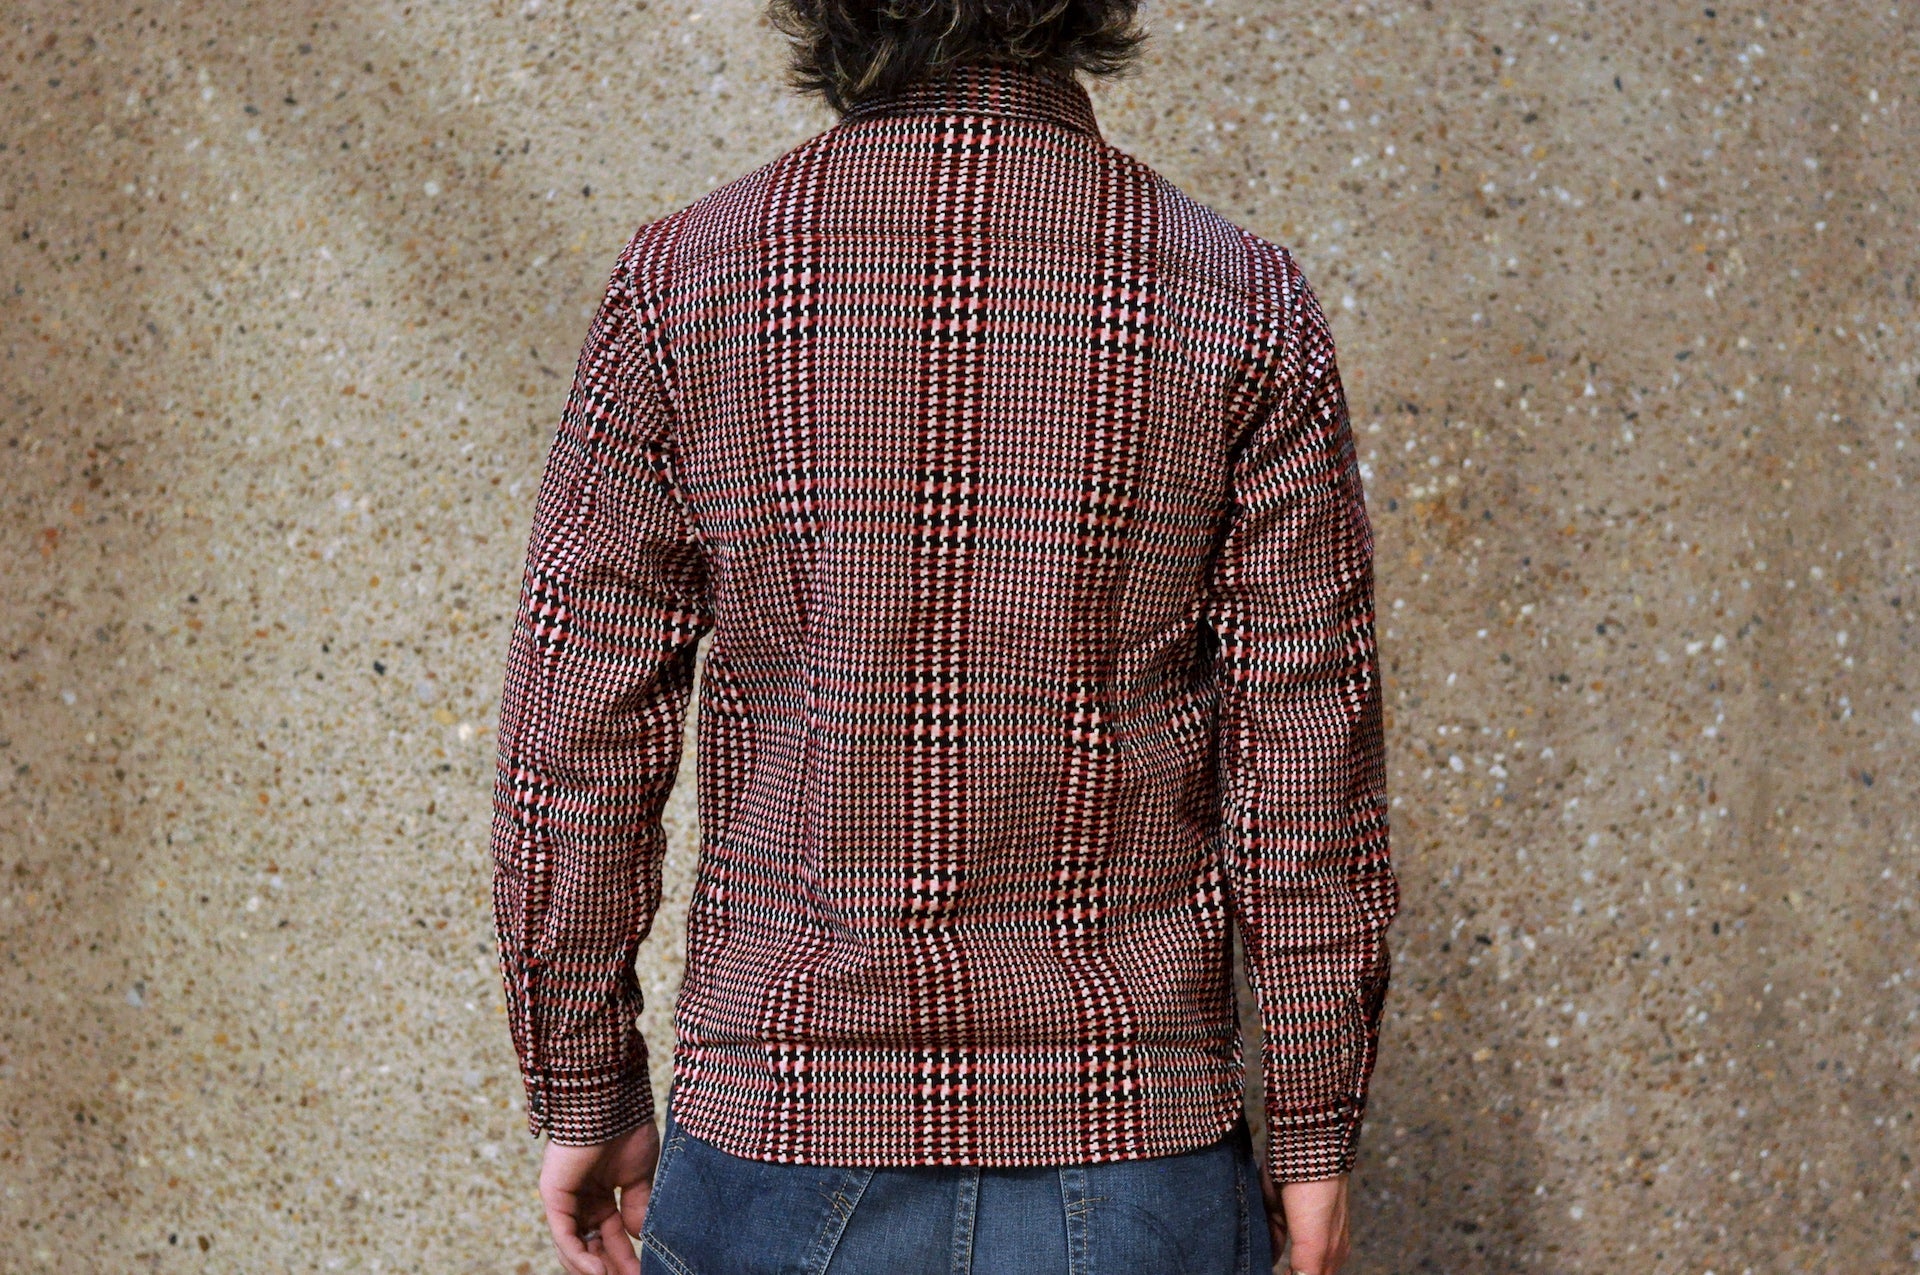 The Flat Head 12oz Glencheck Selvage Flannel Workshirt (Wine)